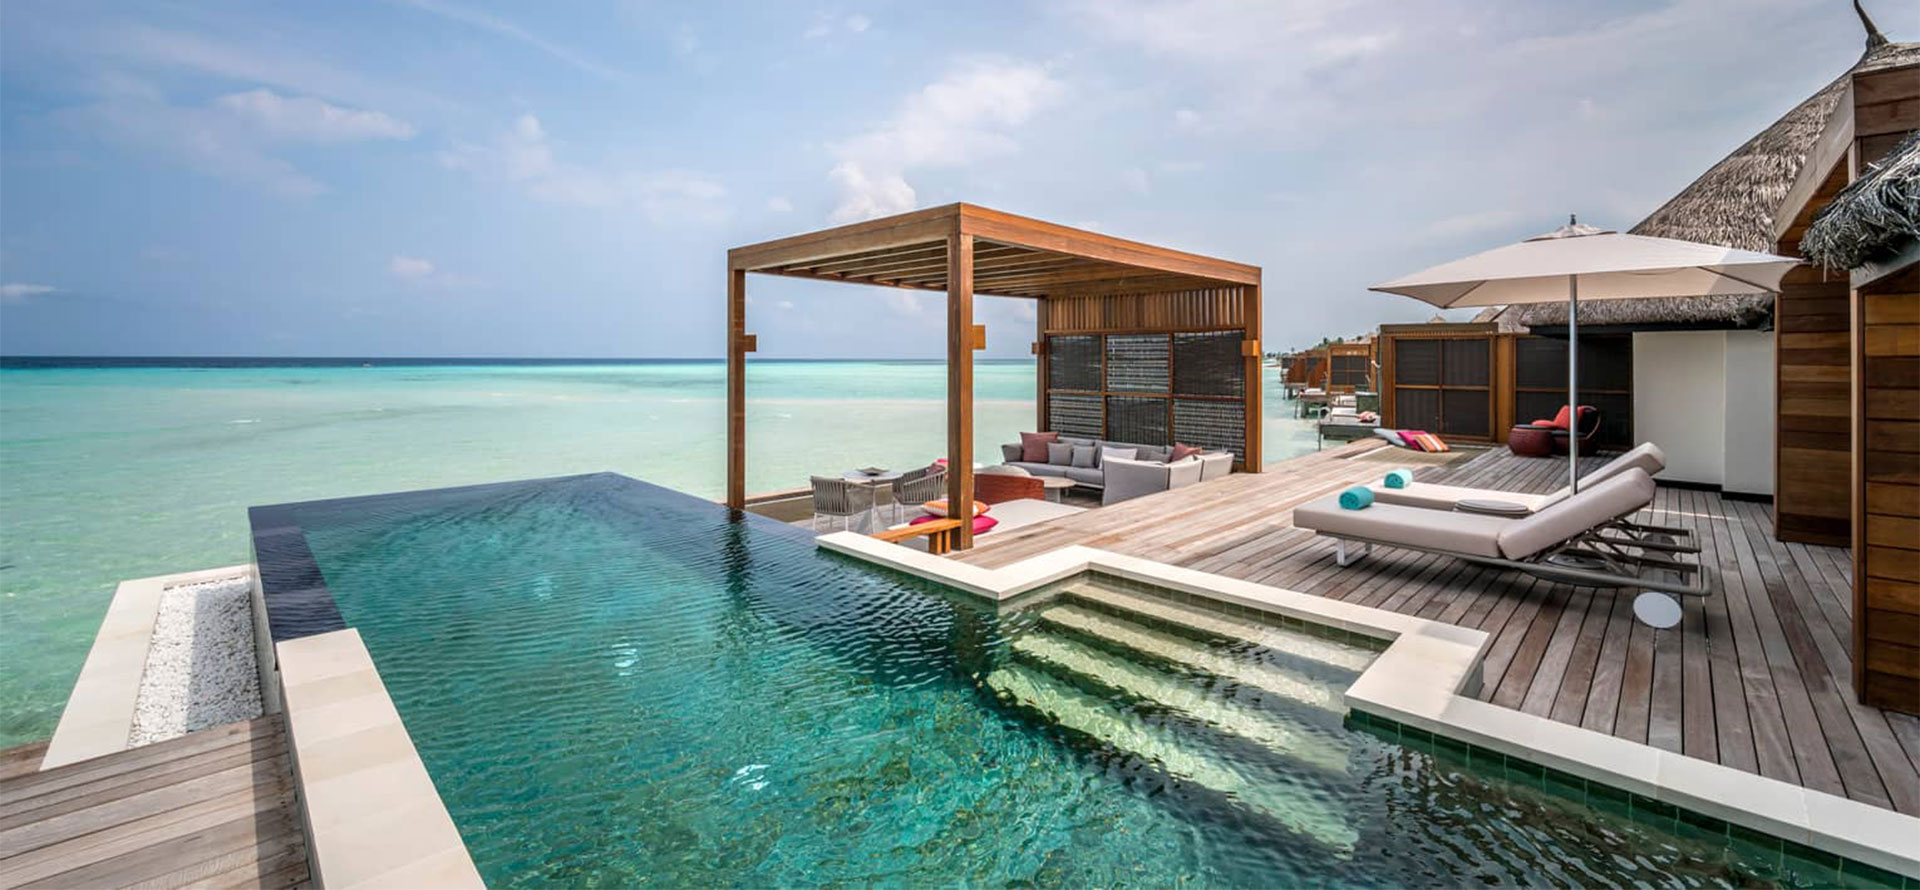 Swimming pool in overwater bungalow in Maldives.